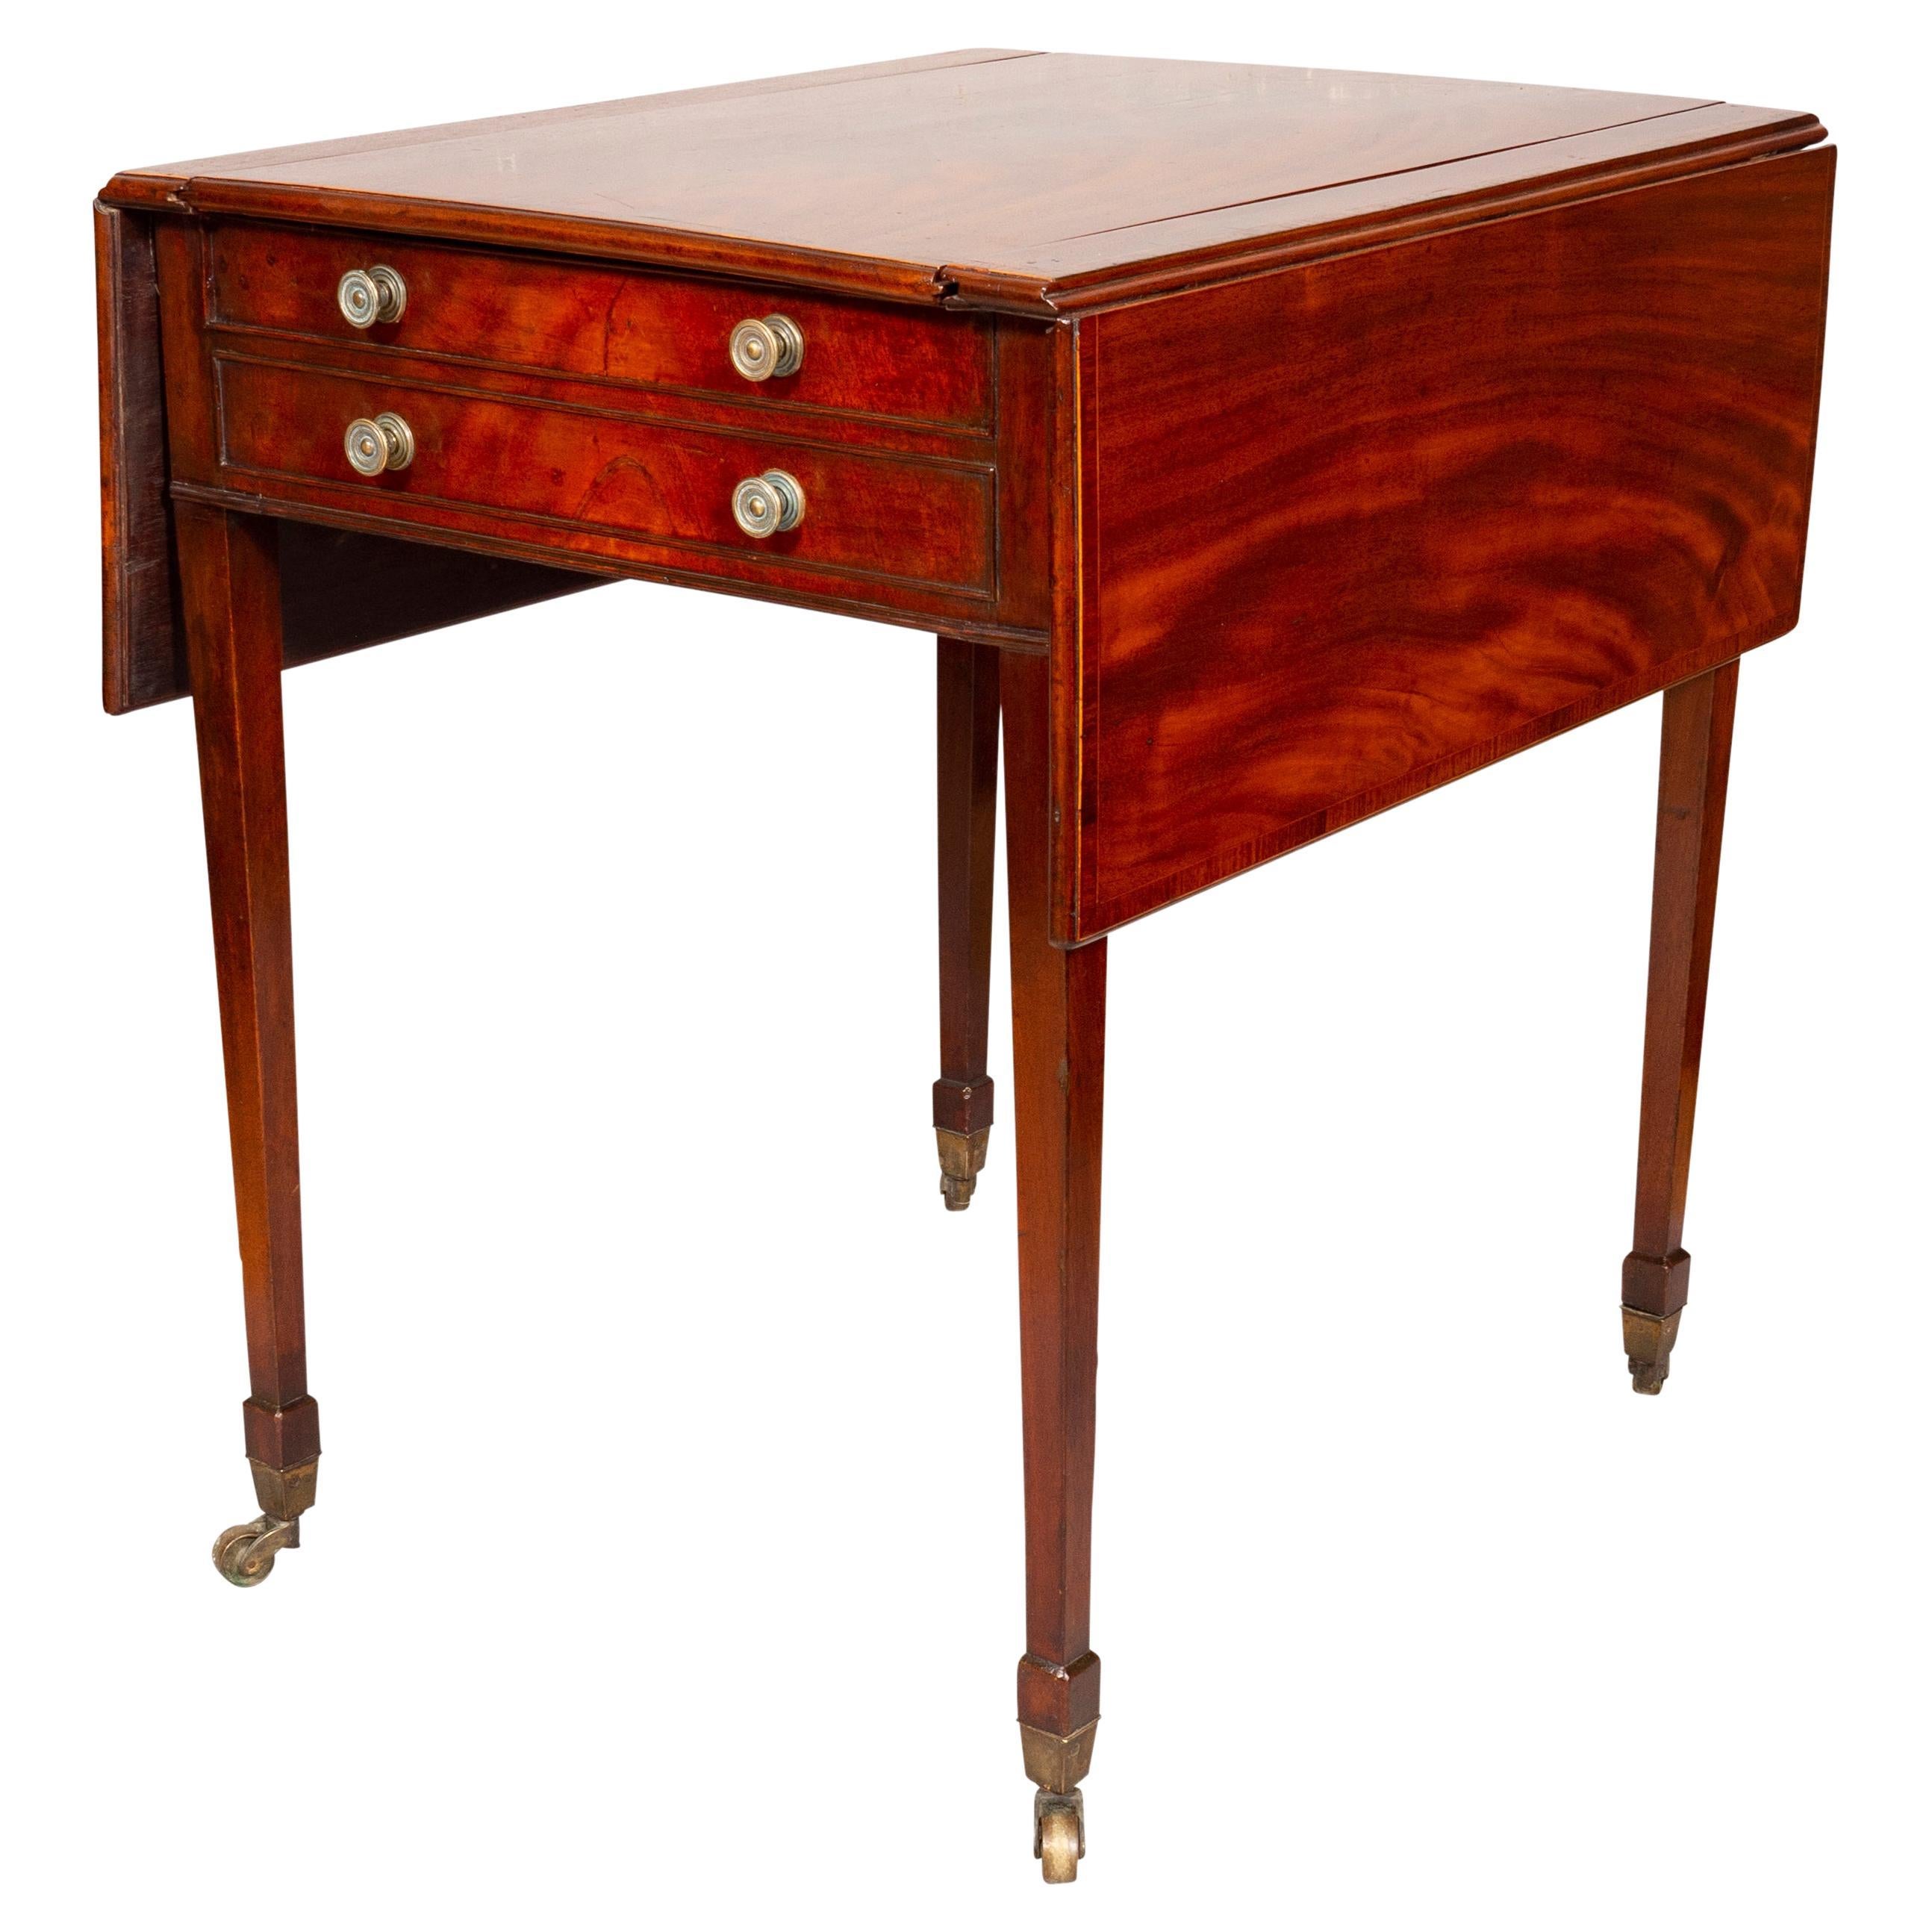 With rectangular top with drop leaves and sliding game board opening to a backgammon surface over a false and working drawers, raised on square tapered legs. Casters.